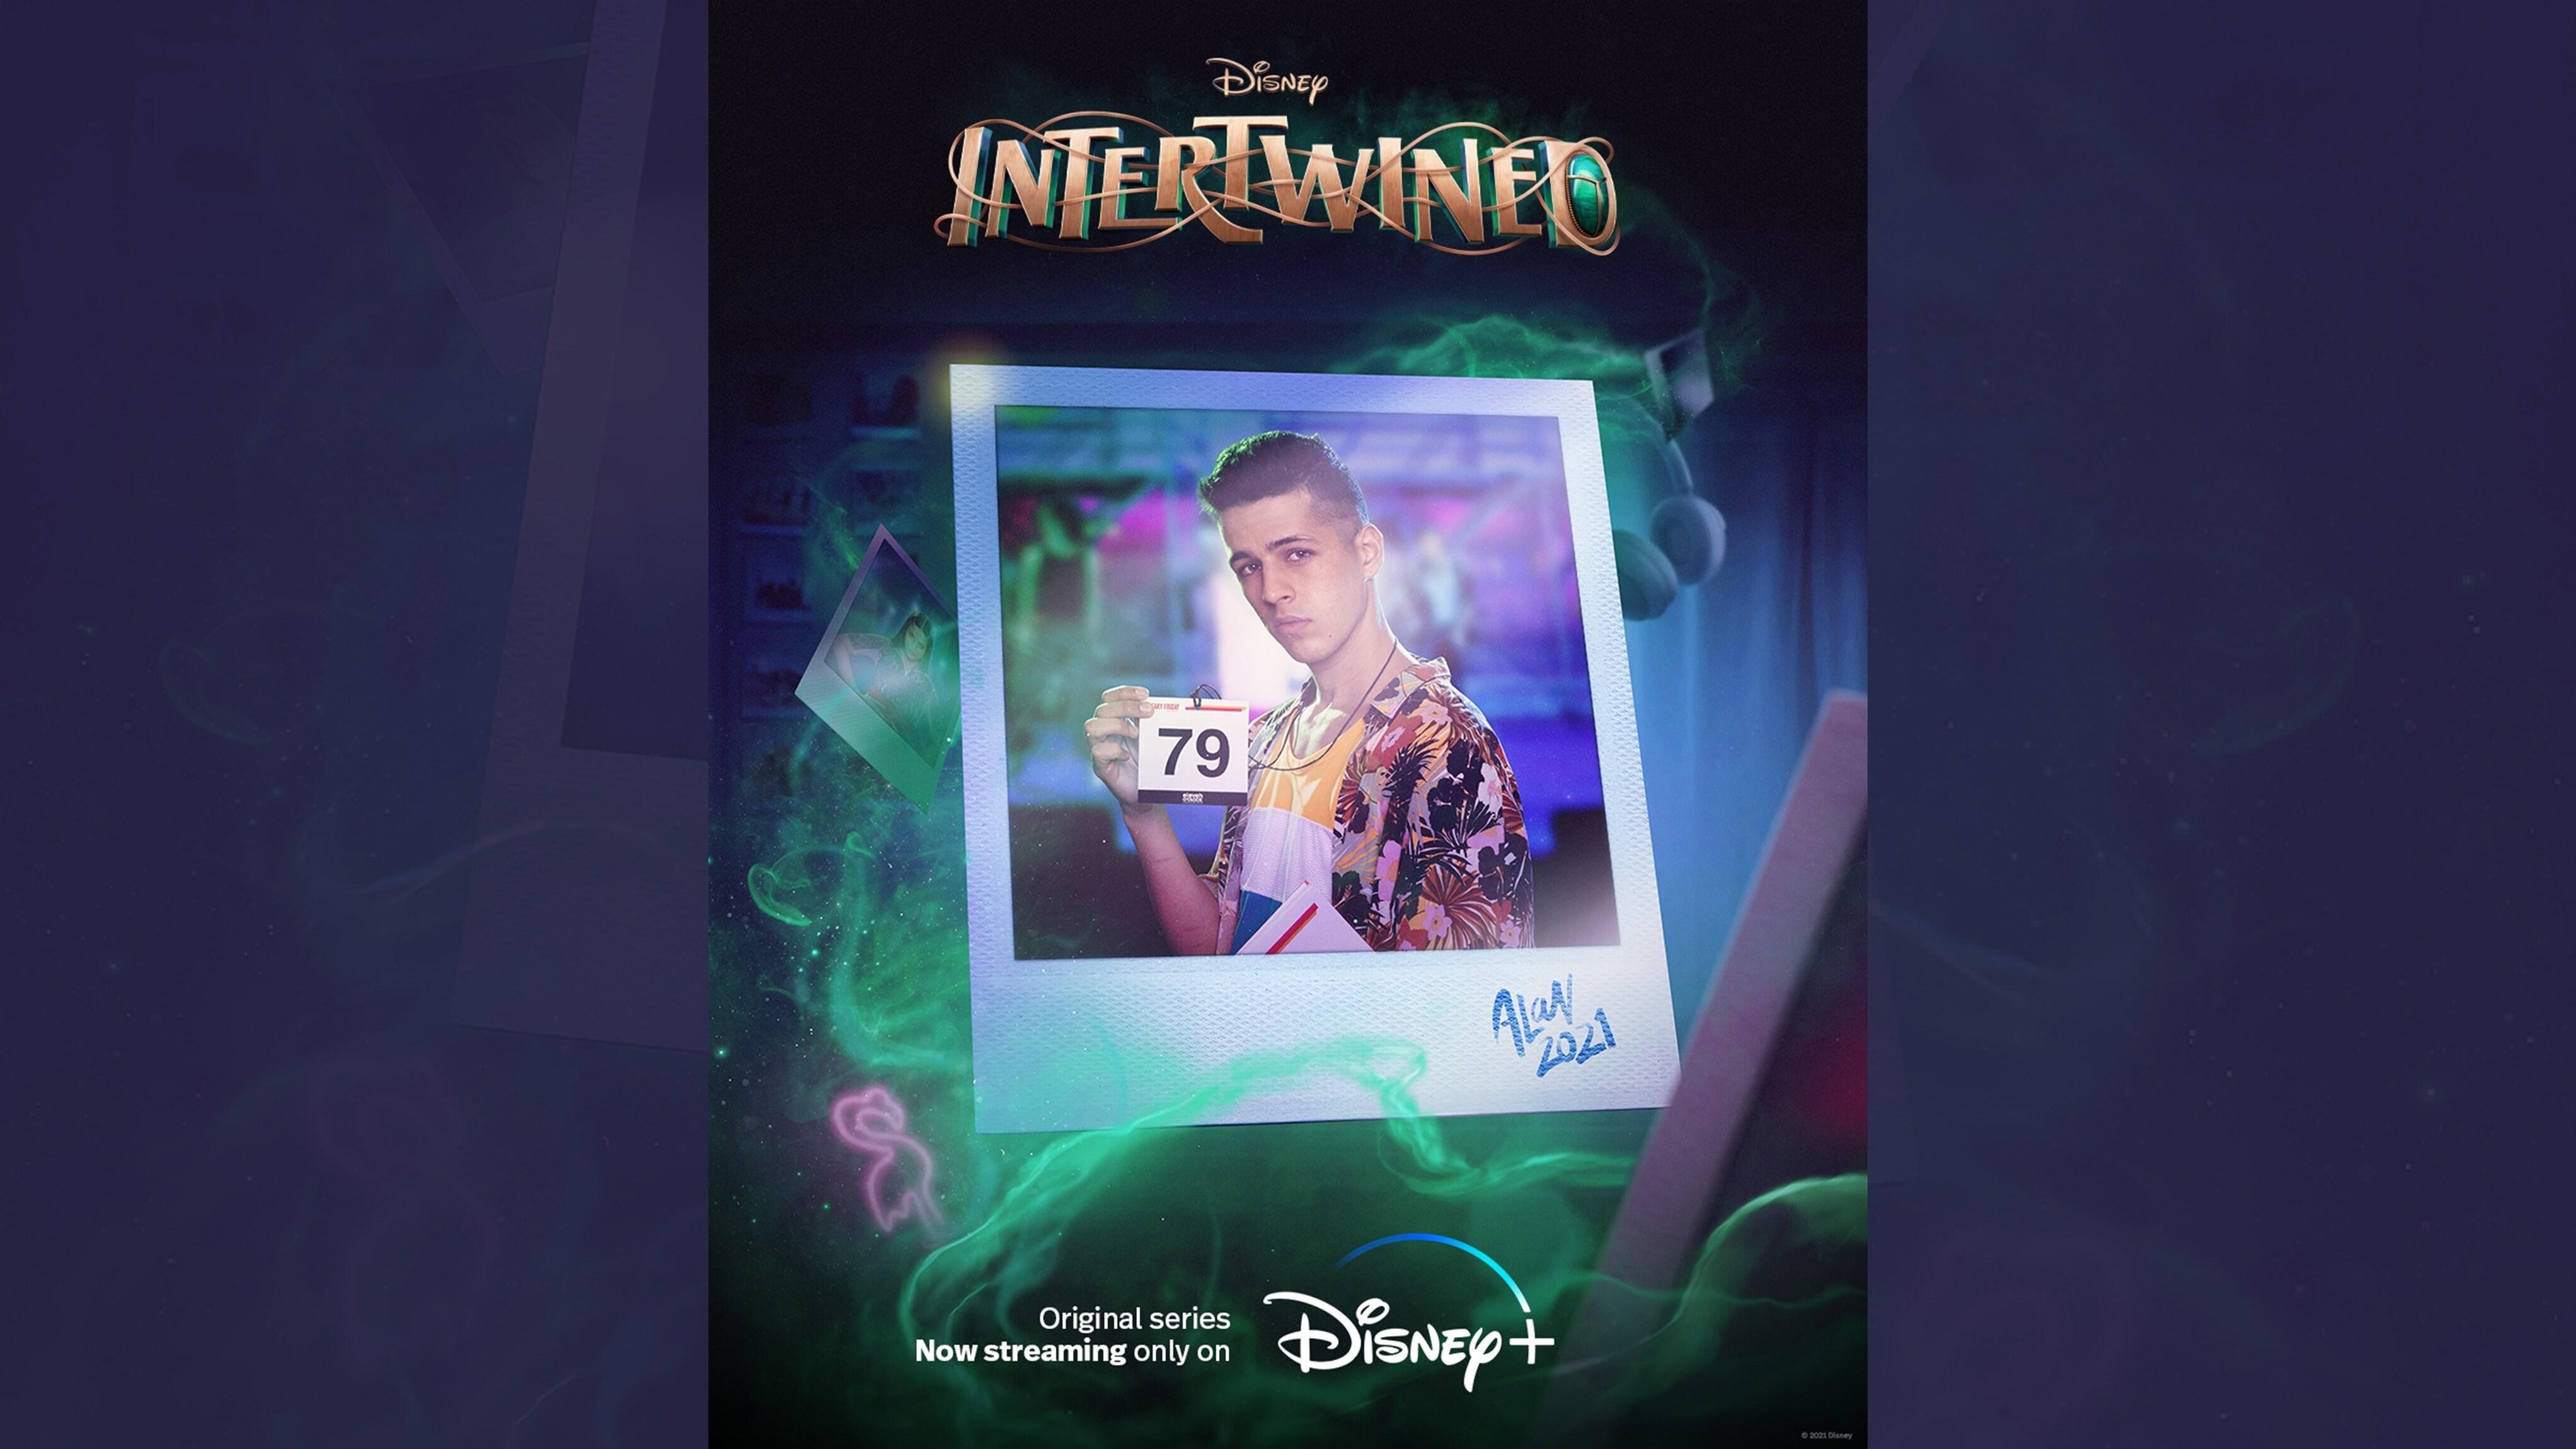 Disney | Intertwined | Alan (2021) | Original series now streaming only on Disney+